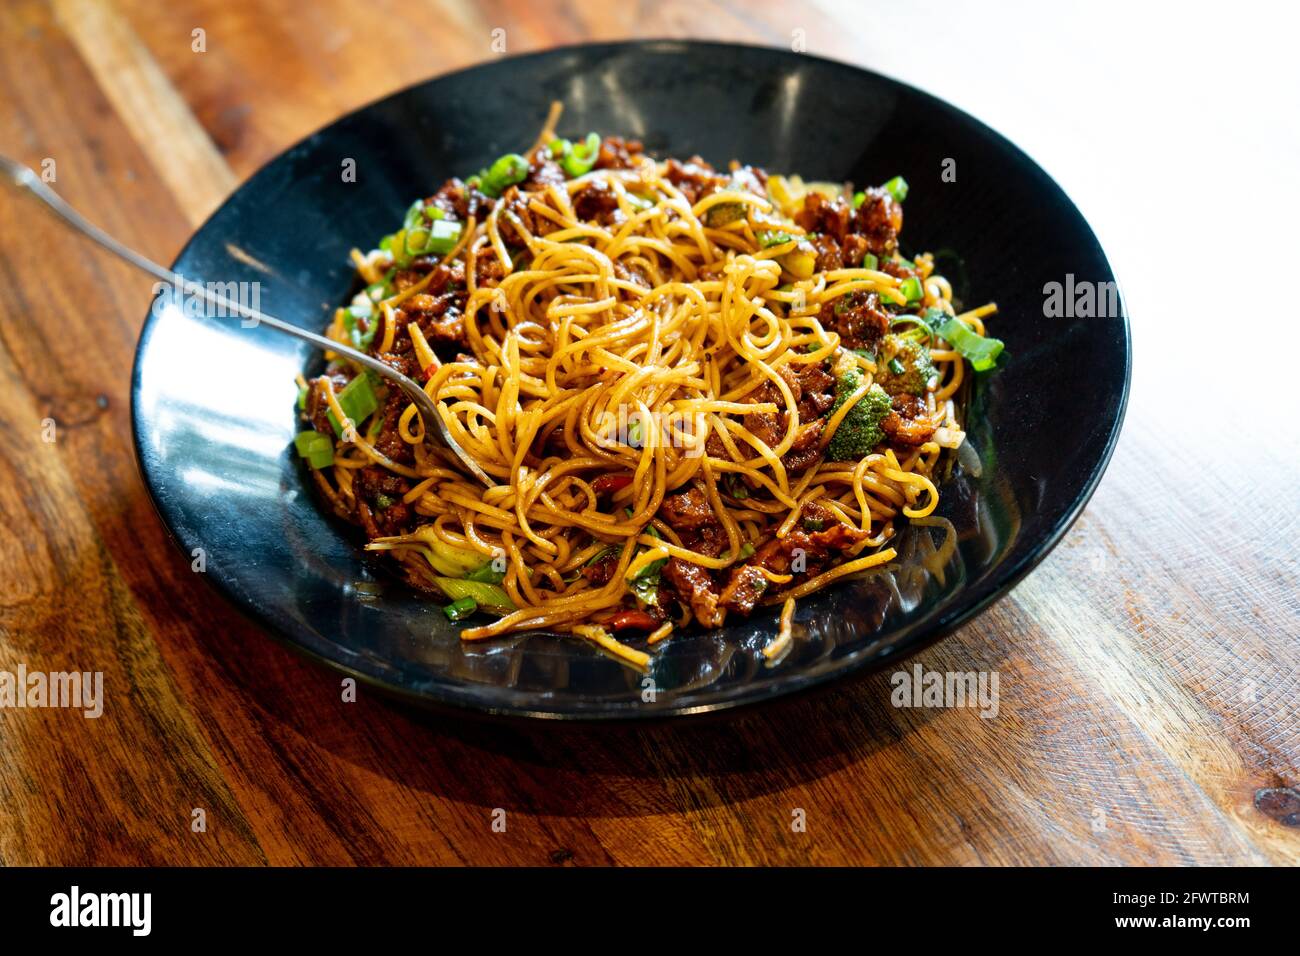 Indo chinese thin noodles garnished with green vegetables and spices with chiceken tofu and paneer placed on a black bowl on a wooden table Stock Photo